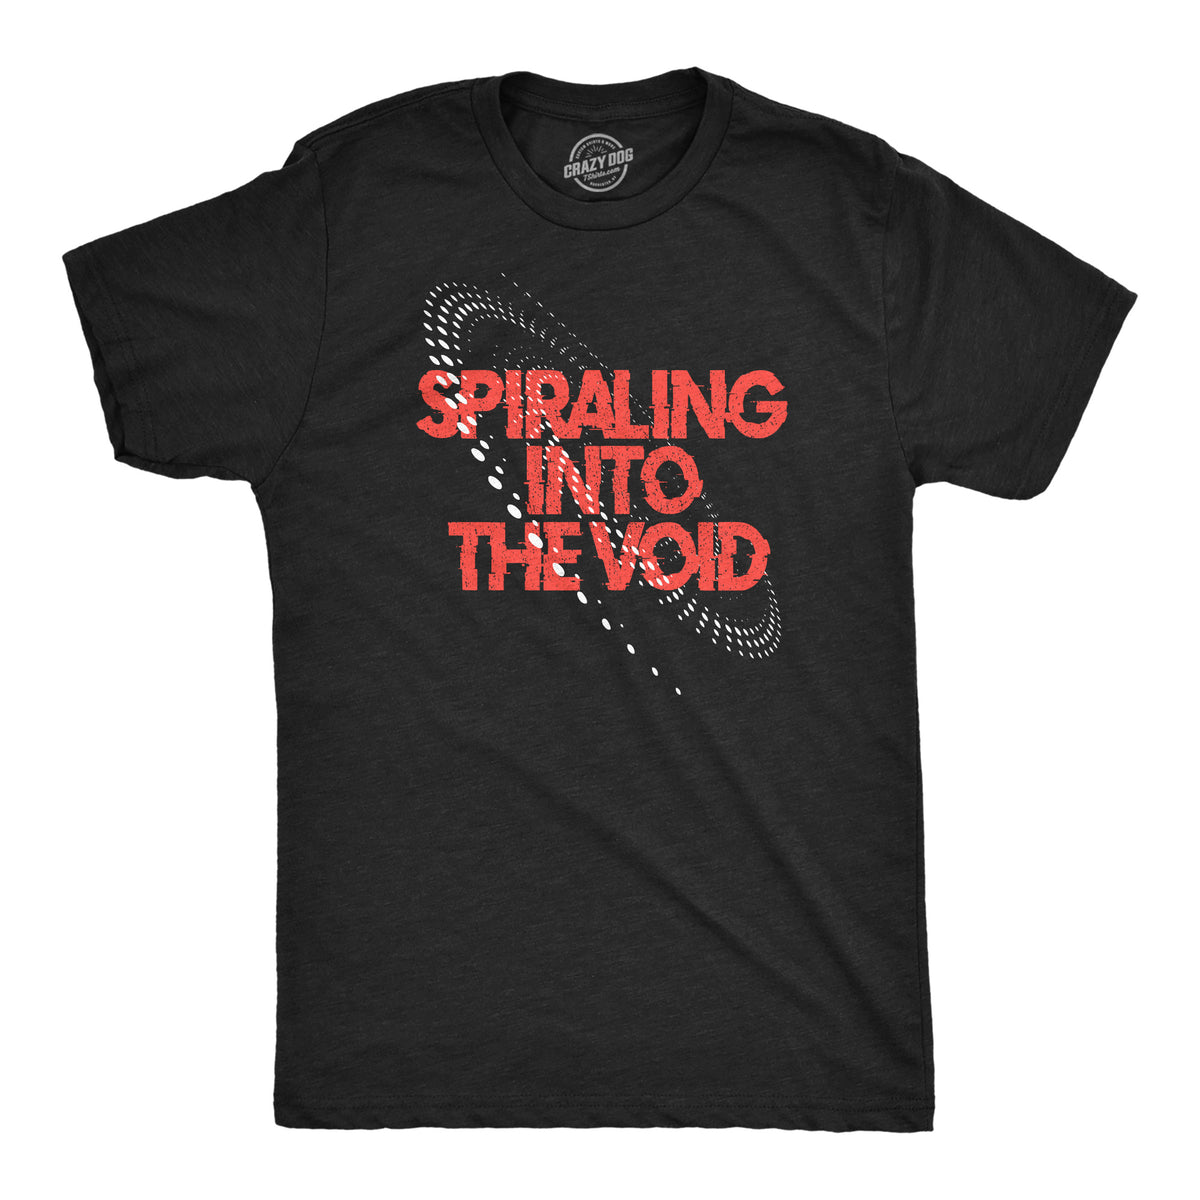 Funny Heather Black - VOID Spiraling Into The Void Mens T Shirt Nerdy sarcastic Tee